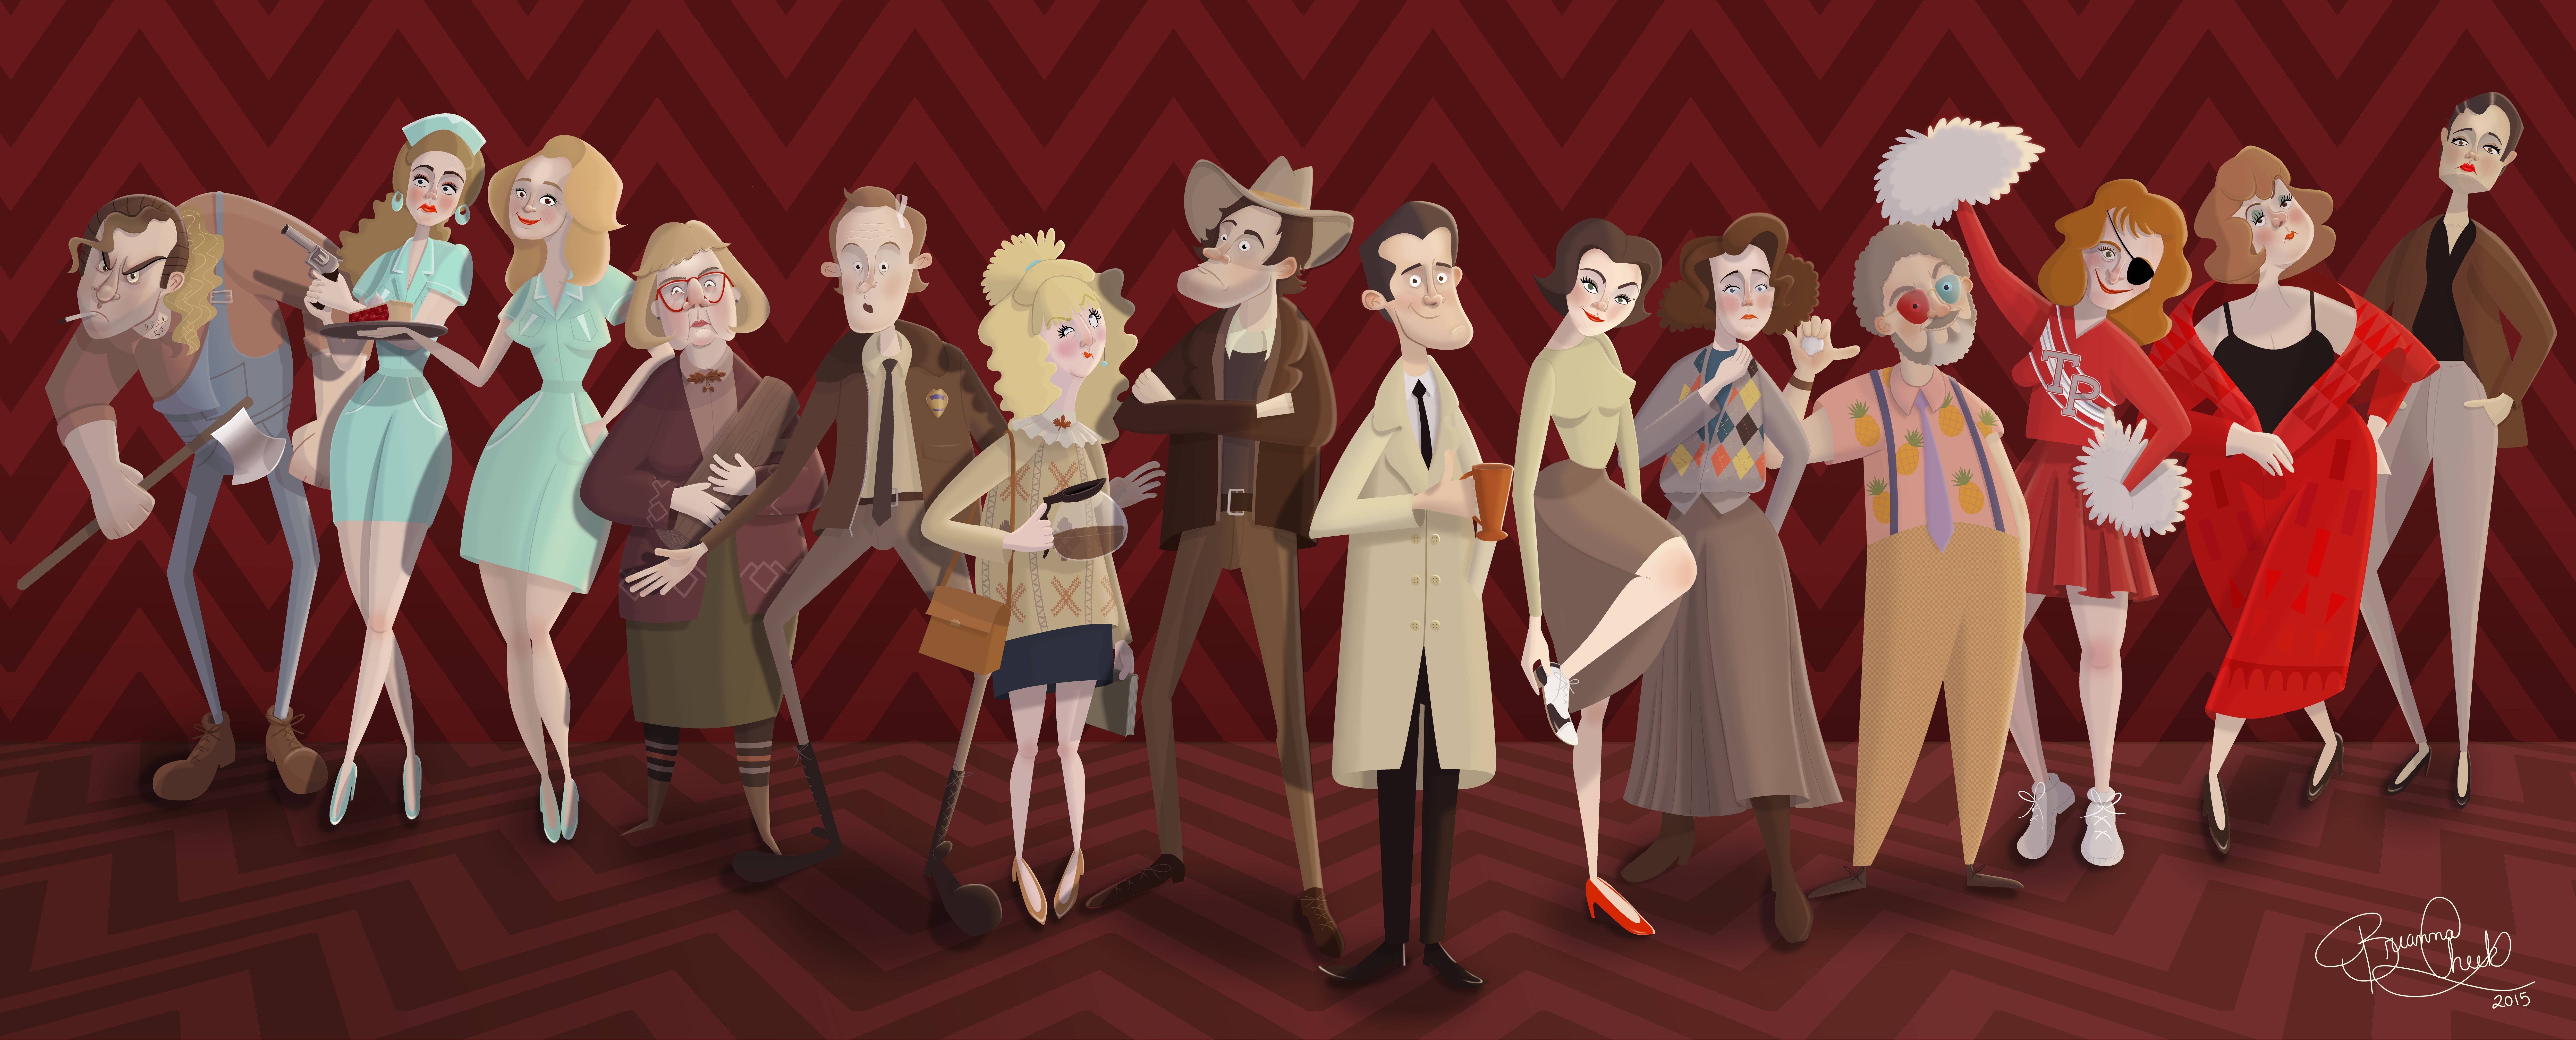 Twin Peaks Red Background 2015 Year Artwork 15692x6335